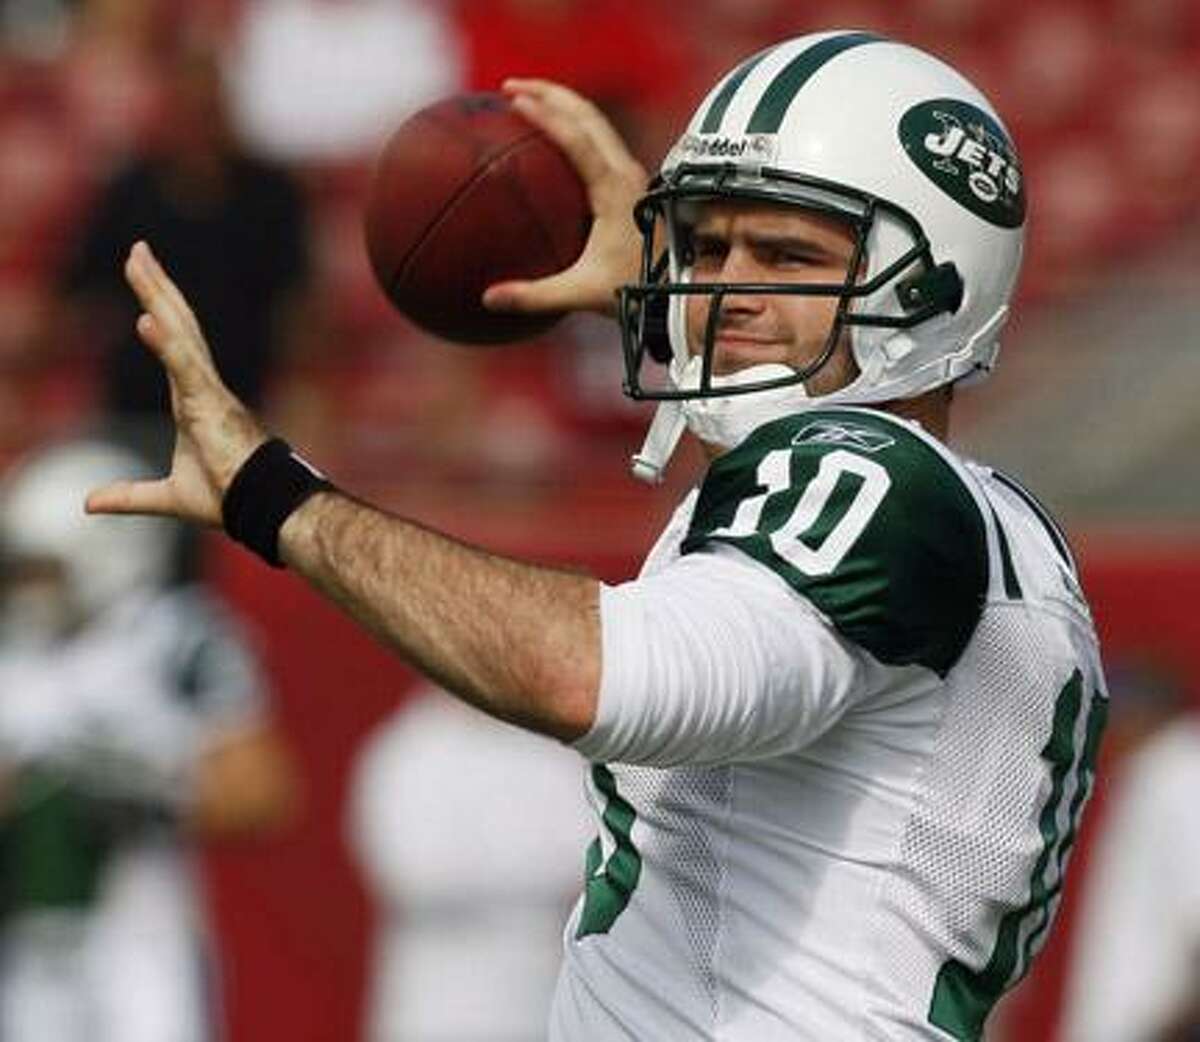 AP Photo by Chris O'Meara In this file photo taken Dec. 13, 2009, New York Jets' Erik Ainge throws before an NFL football game against the Tampa Bay Buccaneers in Tampa, Fla. The New York Jets backup quarterback told The Associated Press on Thursday, June 23, 2011, that his playing career is over because of injuries to his right foot and throwing shoulder. Ainge, 25, nearly a year clean of drugs and alcohol, missed all last NFL season while recovering from many years of battling addictions.